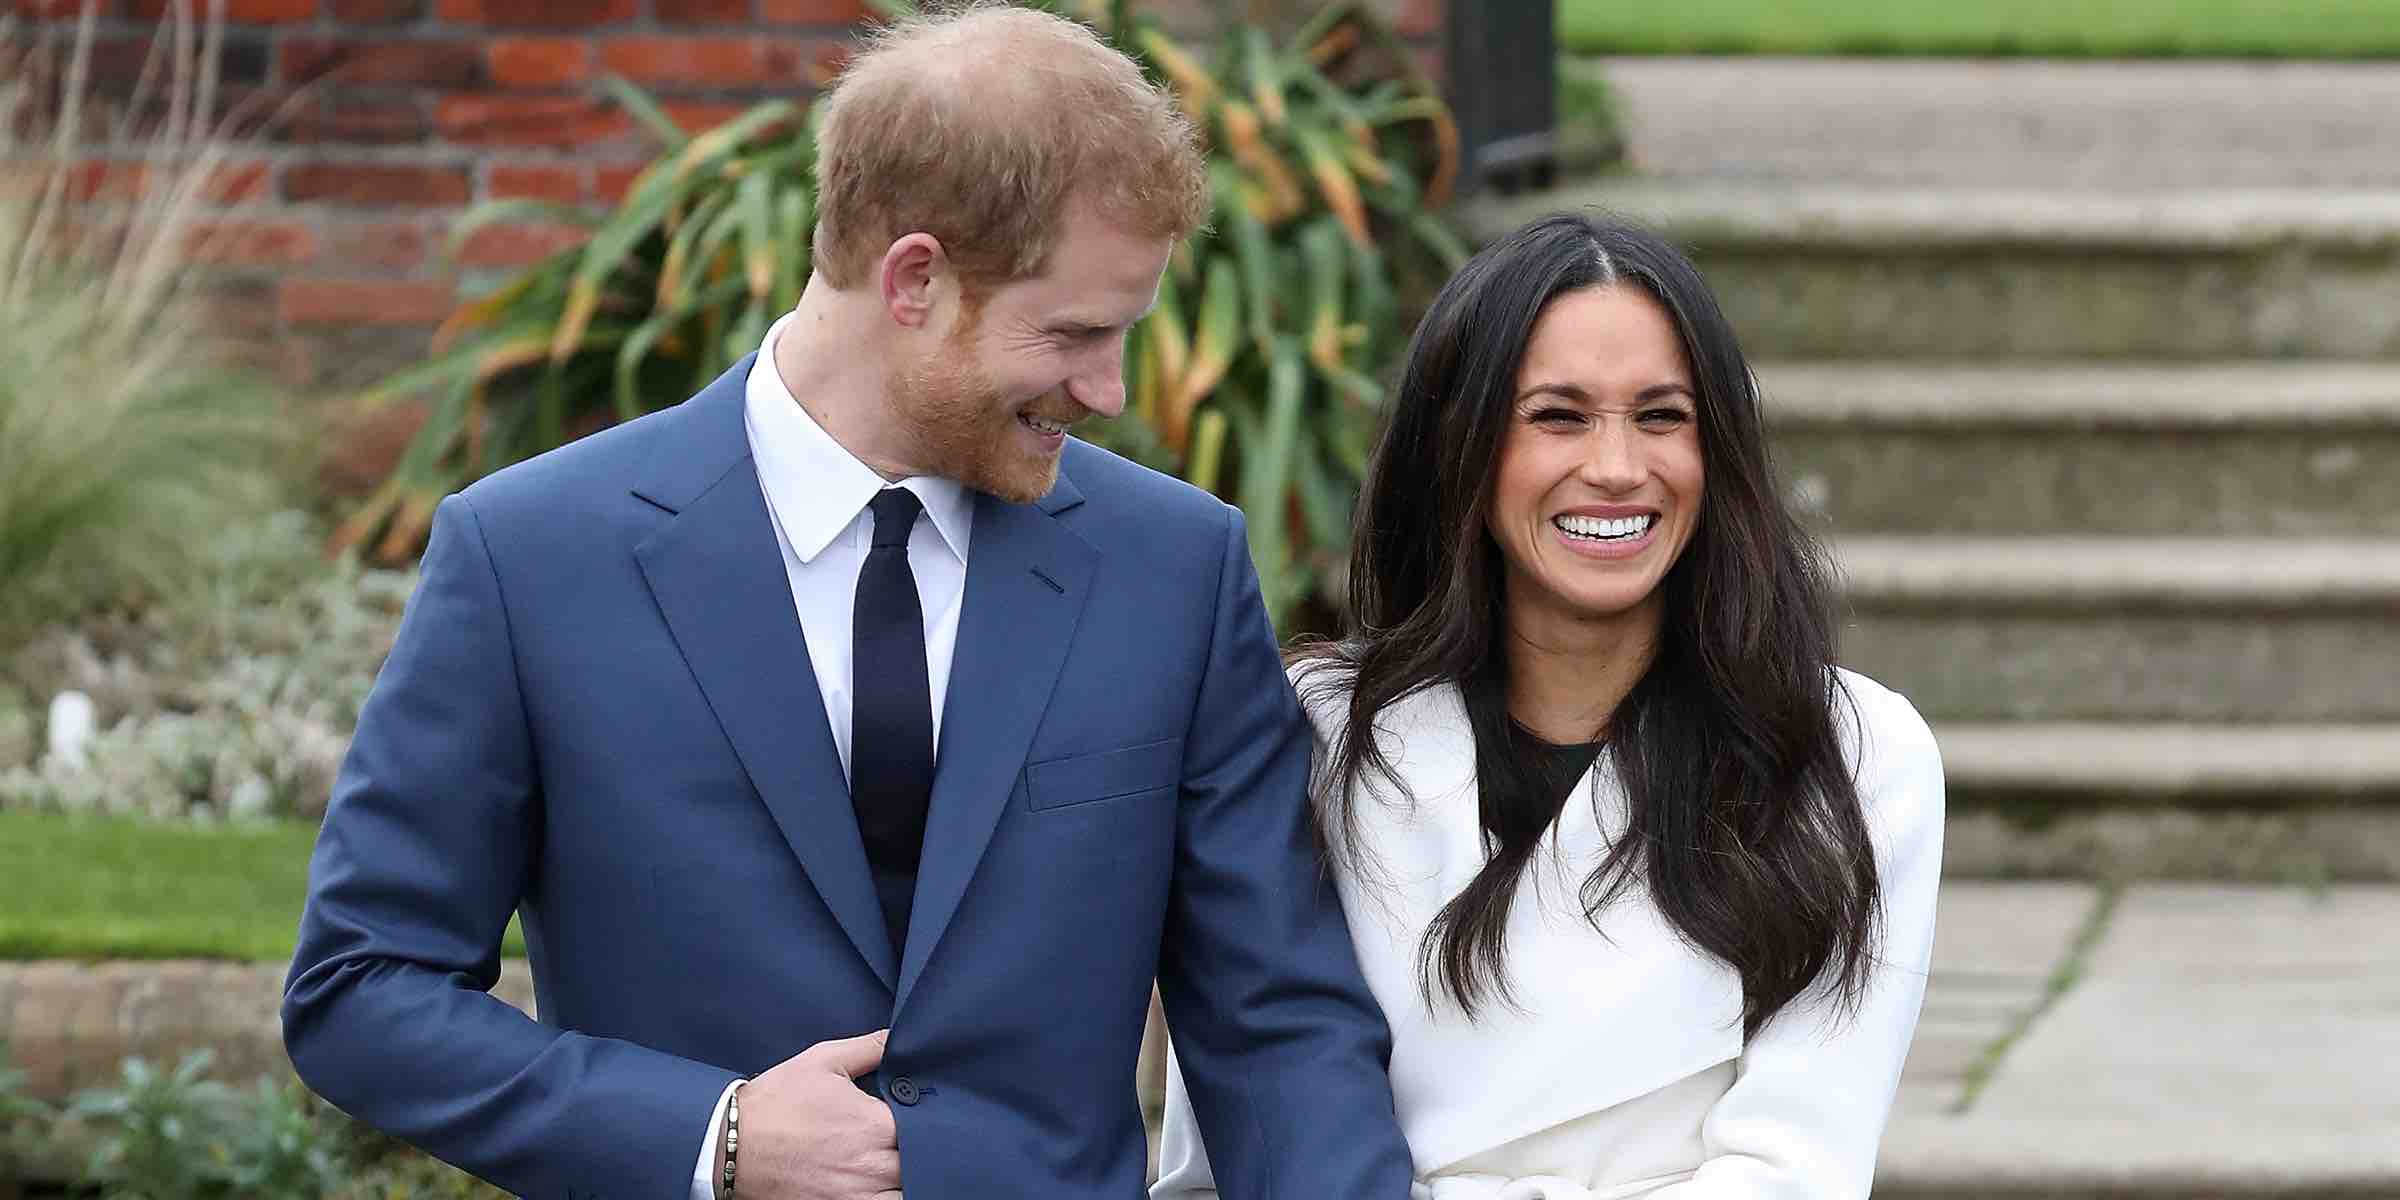 Meghan Markle and Prince Harry are trading royal stuffiness for mixing with the masses. Karen Javitch showcases a song in their honor. Here's what we know.